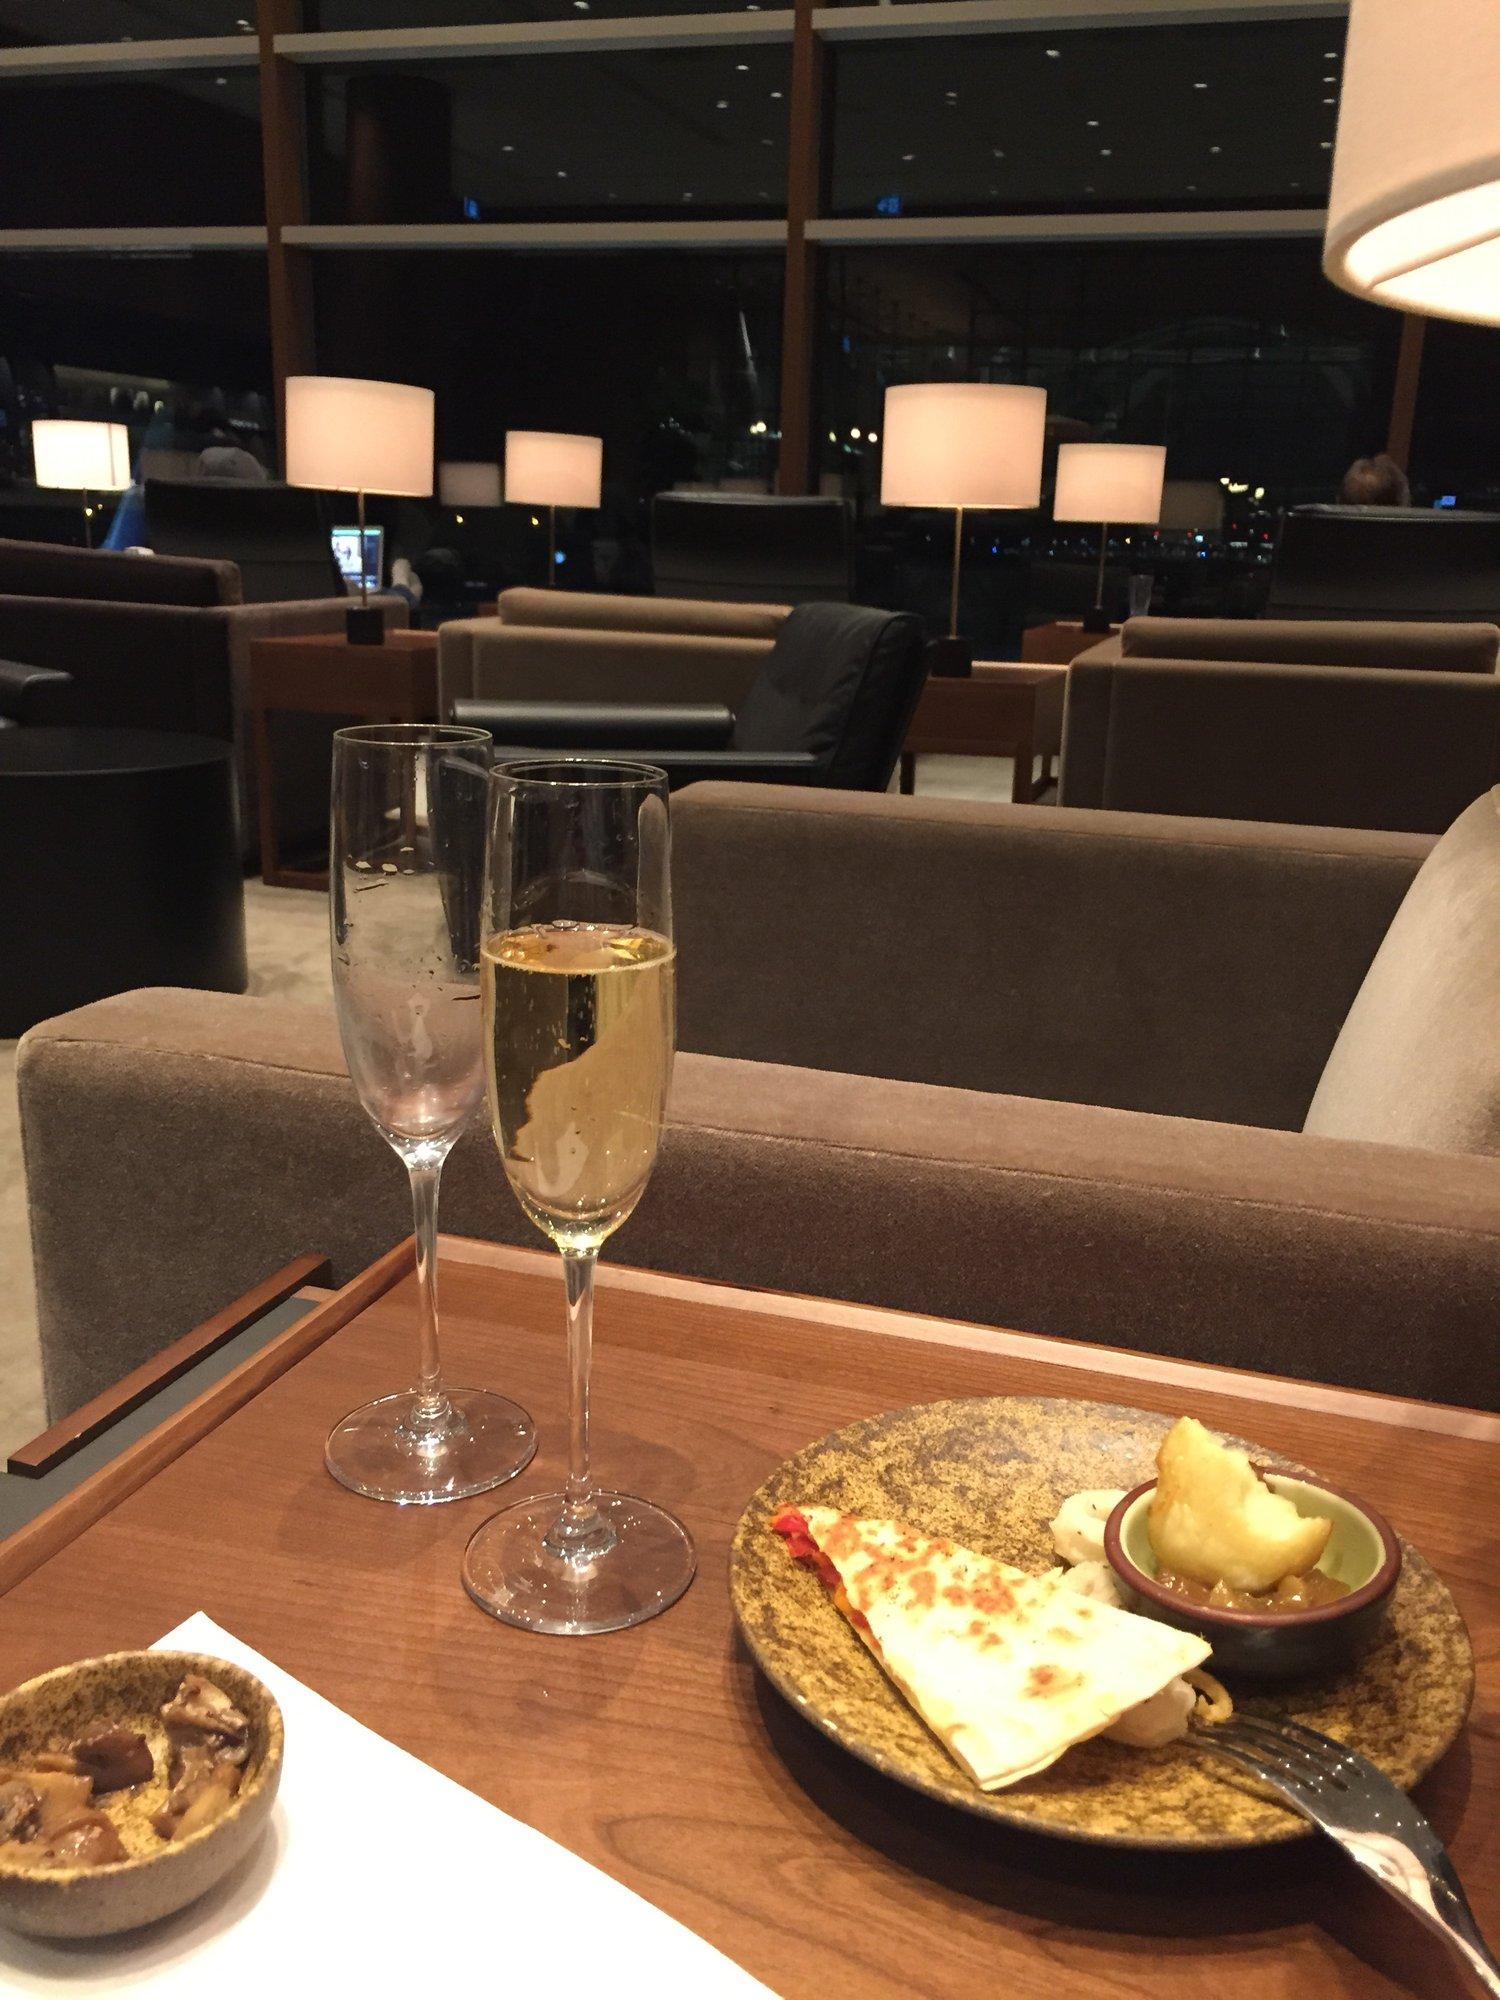 Cathay Pacific First and Business Class Lounge image 10 of 11